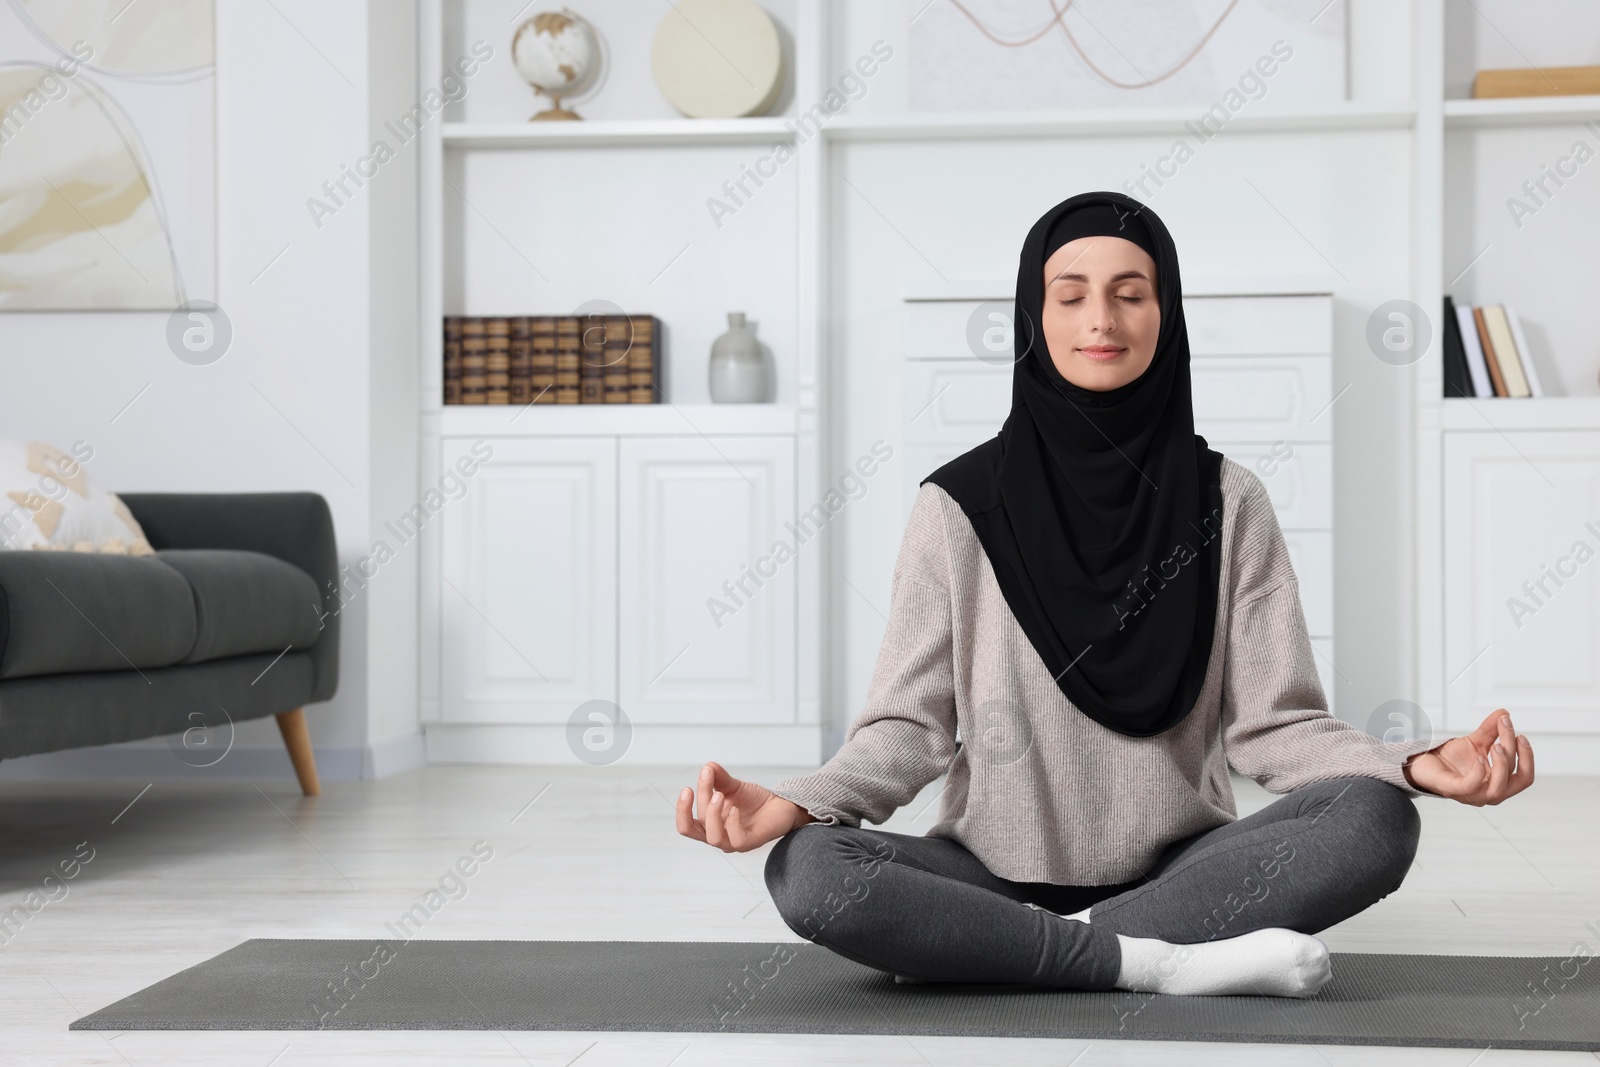 Photo of Muslim woman in hijab meditating on fitness mat at home. Space for text